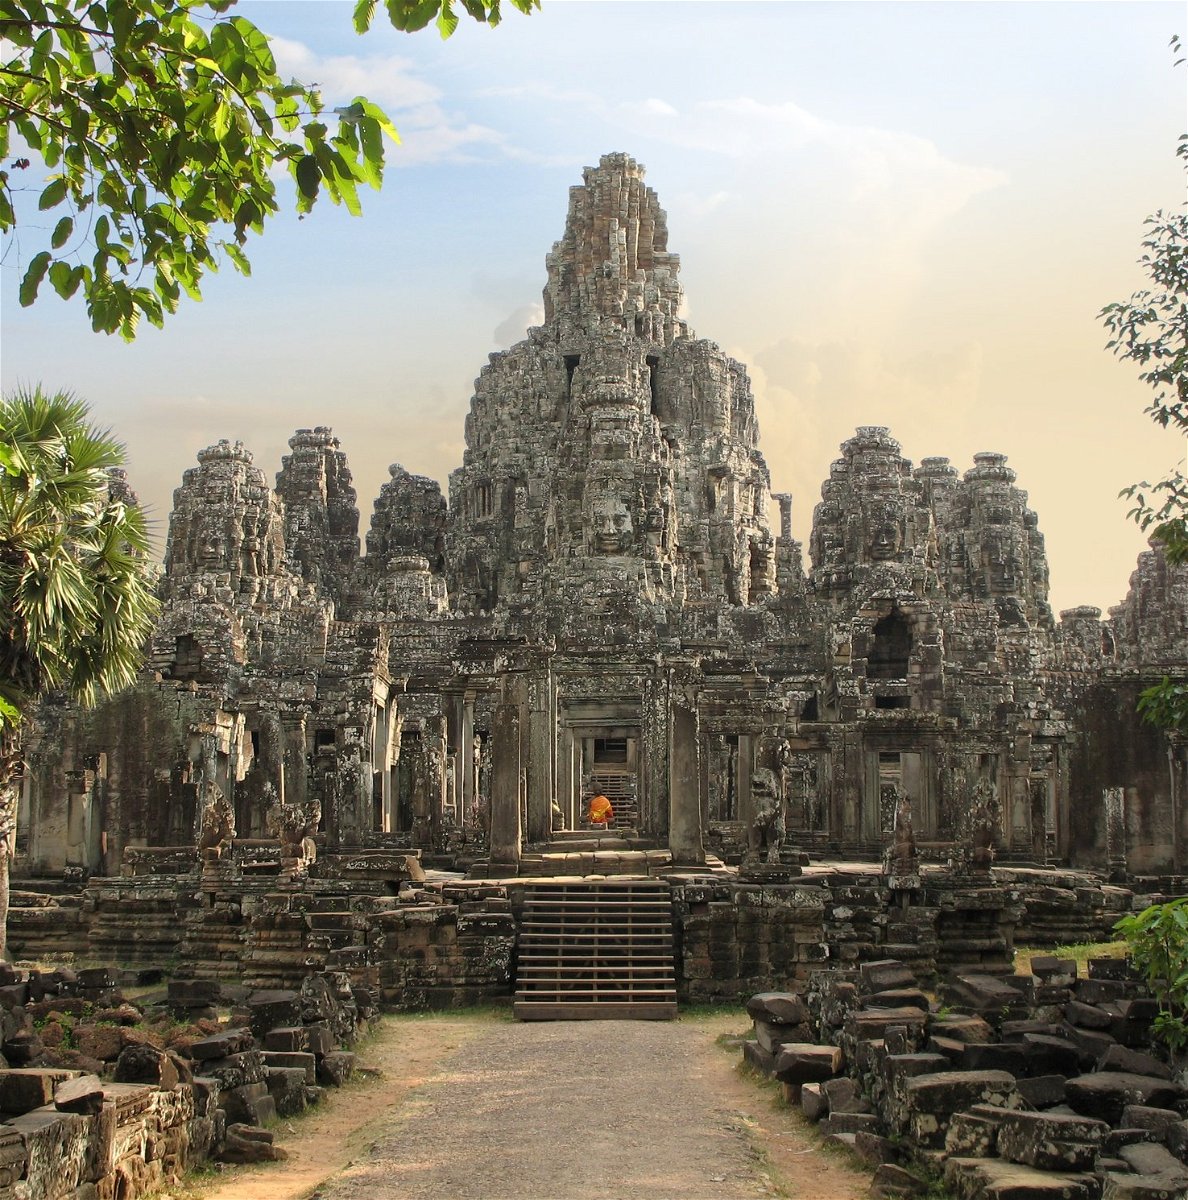 Explore Cambodia's incredible temples with your group